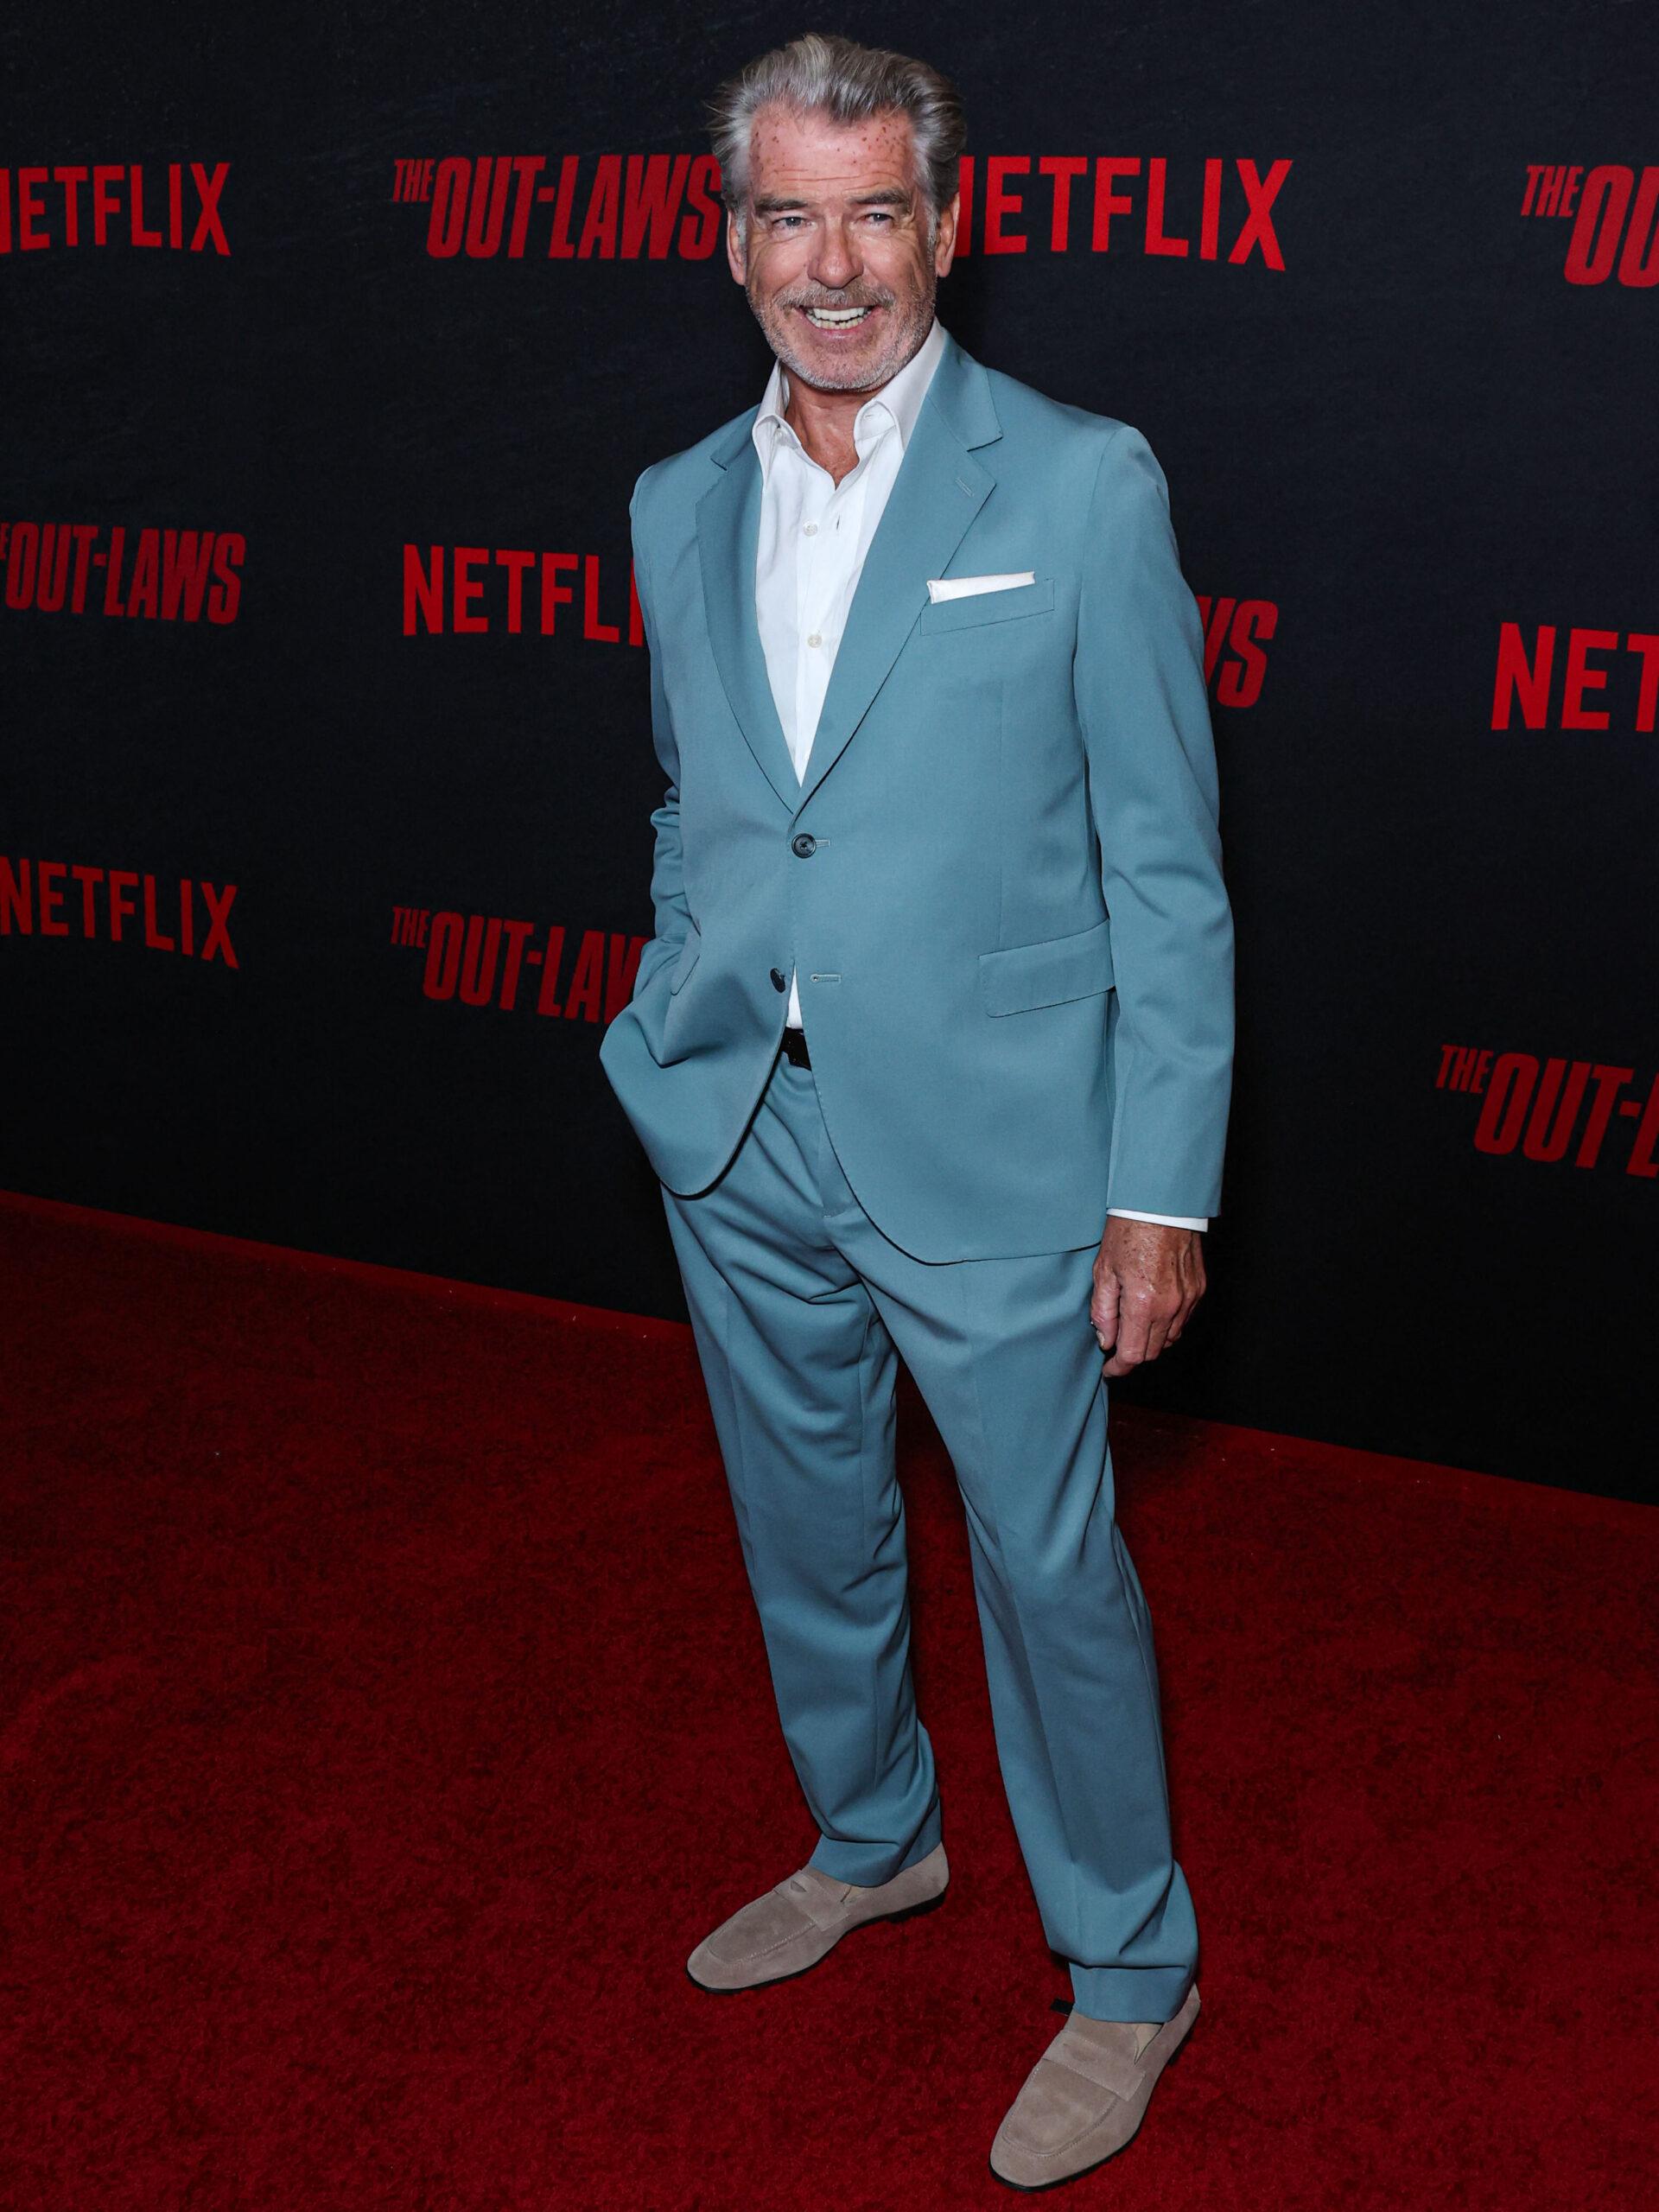 Pierce Brosnan attends Los Angeles Premiere Of Netflix's 'The Out-Laws'